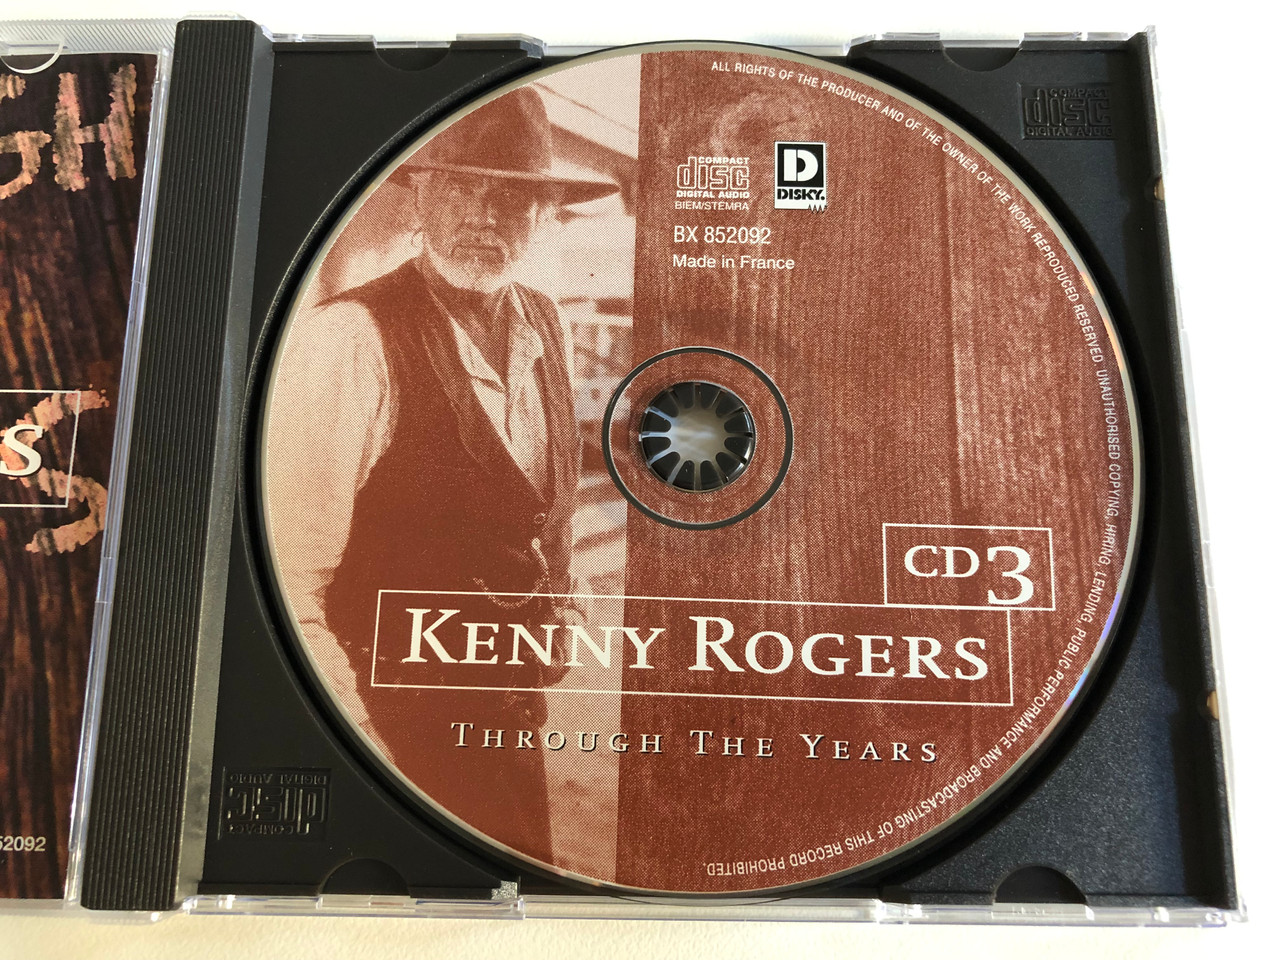 https://cdn10.bigcommerce.com/s-62bdpkt7pb/products/0/images/193205/Through_The_Years_-_Kenny_Rogers_-_CD_3_The_Gambler_Lucille_RubyDont_Take_Your_Love_To_Town_Disky_Audio_CD_1998_BX_852092_3__48664.1632828716.1280.1280.JPG?c=2&_gl=1*1l21a5c*_ga*MjA2NTIxMjE2MC4xNTkwNTEyNTMy*_ga_WS2VZYPC6G*MTYzMjgxNzM2My4xMDIuMS4xNjMyODI4MzUwLjQy